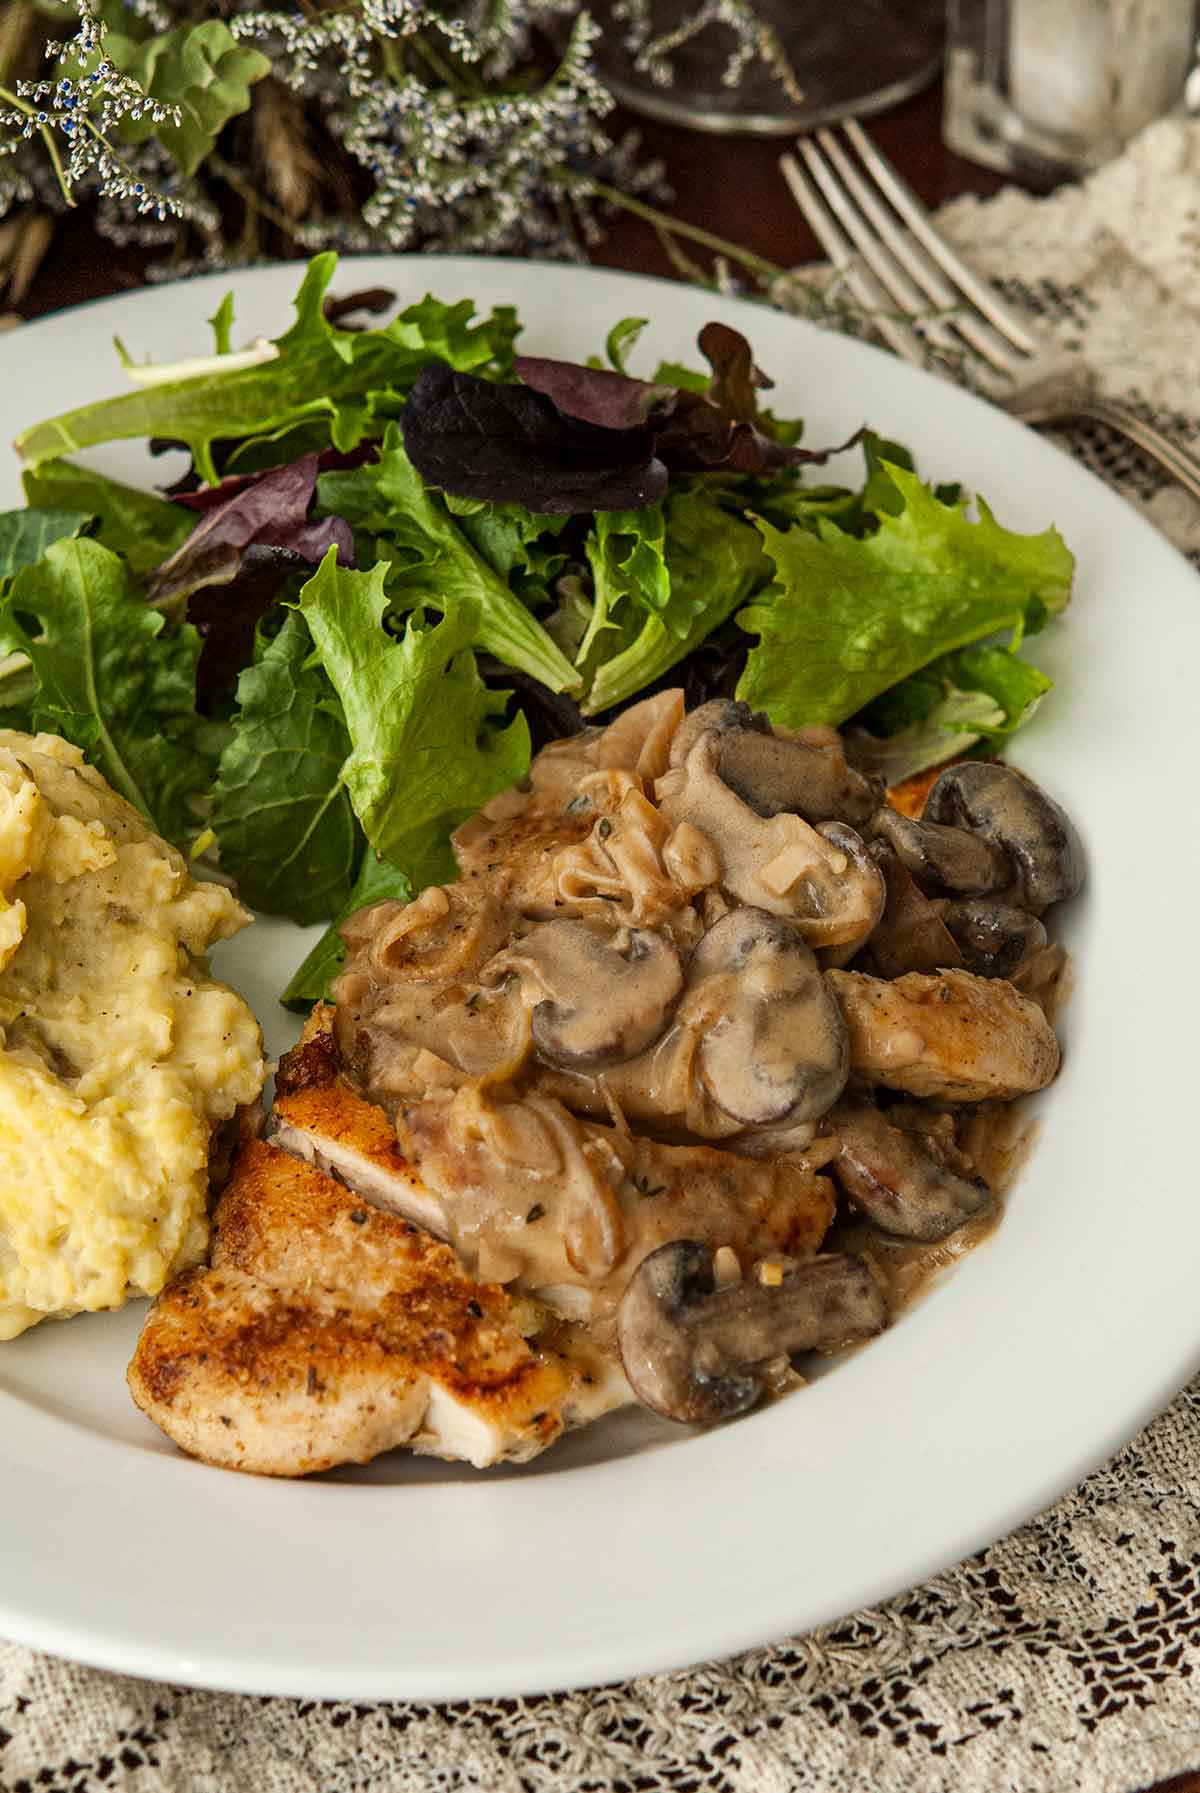 A sliced piece of chicken with Herbs de Provence and white wine mushroom sauce on a plate with salad and potatoes.